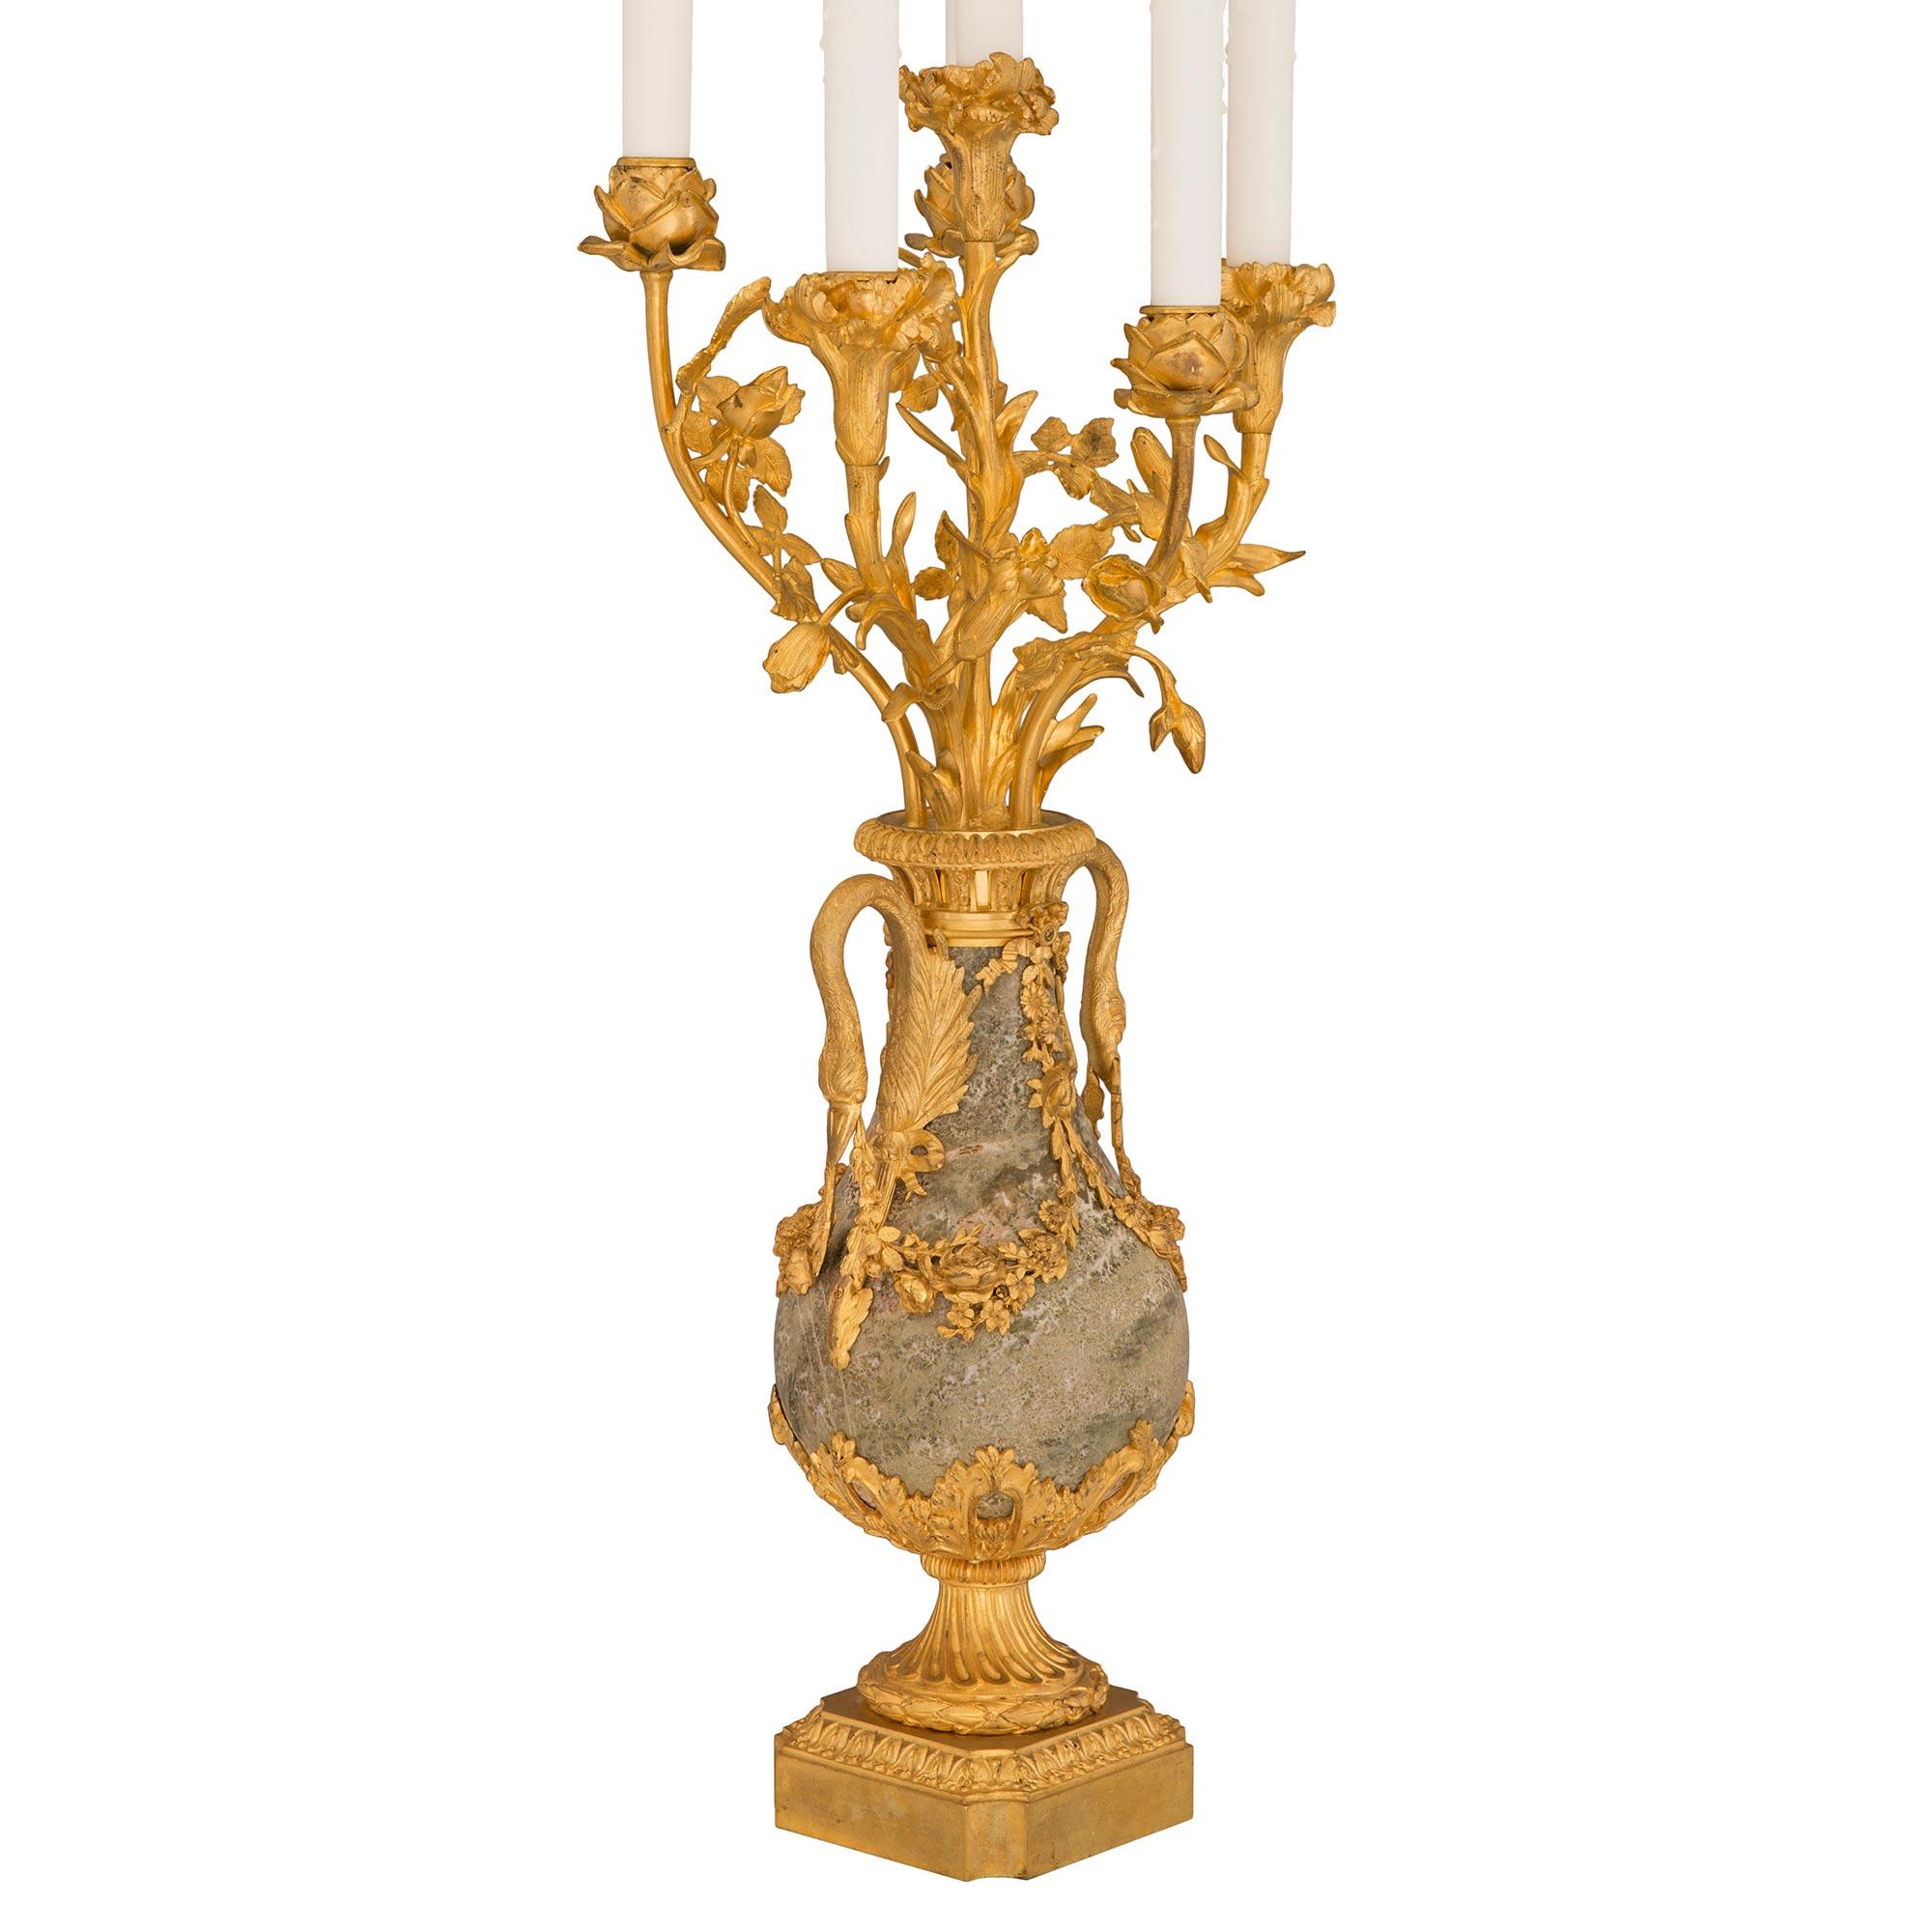 A spectacular and extremely high quality pair of French 19th century Louis XVI st. ormolu and Sarrancolin marble candelabra lamps. Each six arm lamp is raised by an elegant square base with concave corners and a finely mottled wrap around Coeur de